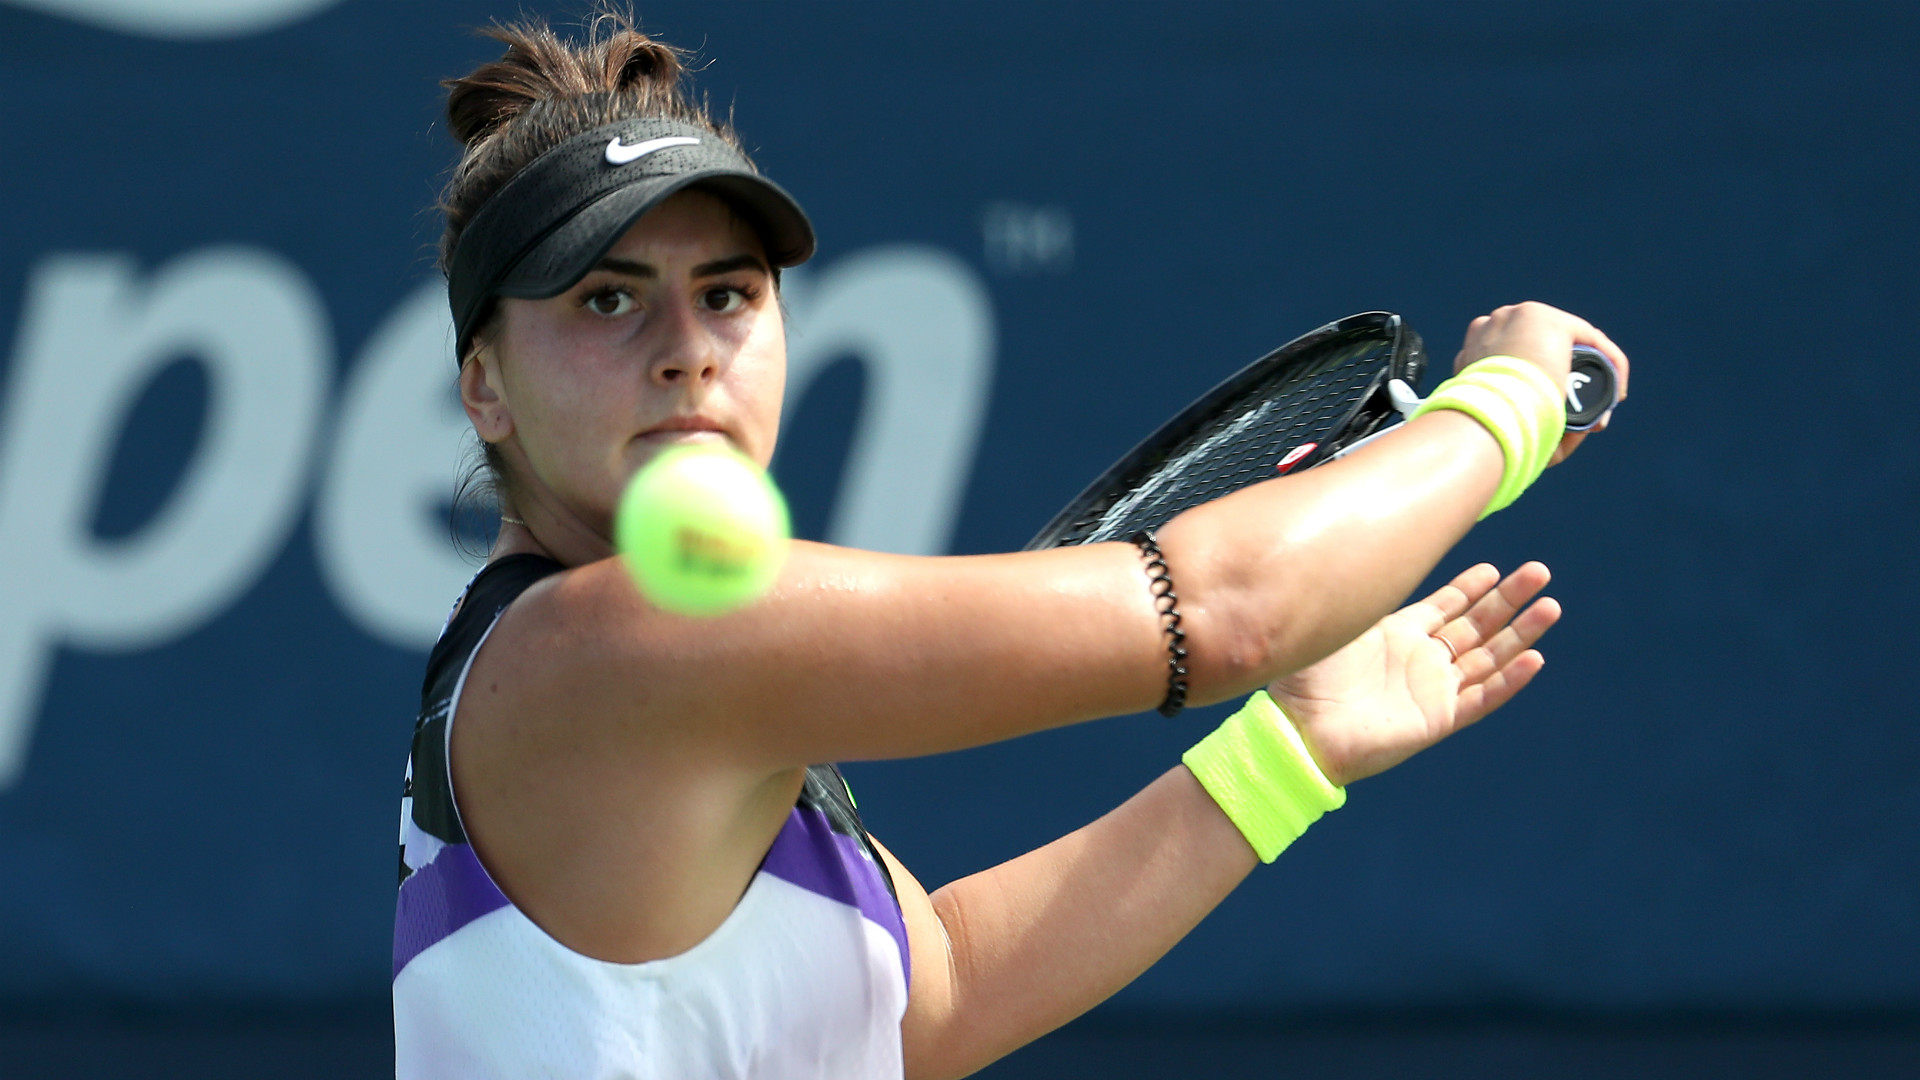 U.S. Open 2019: Bianca Andreescu overcomes sloppy play to ...